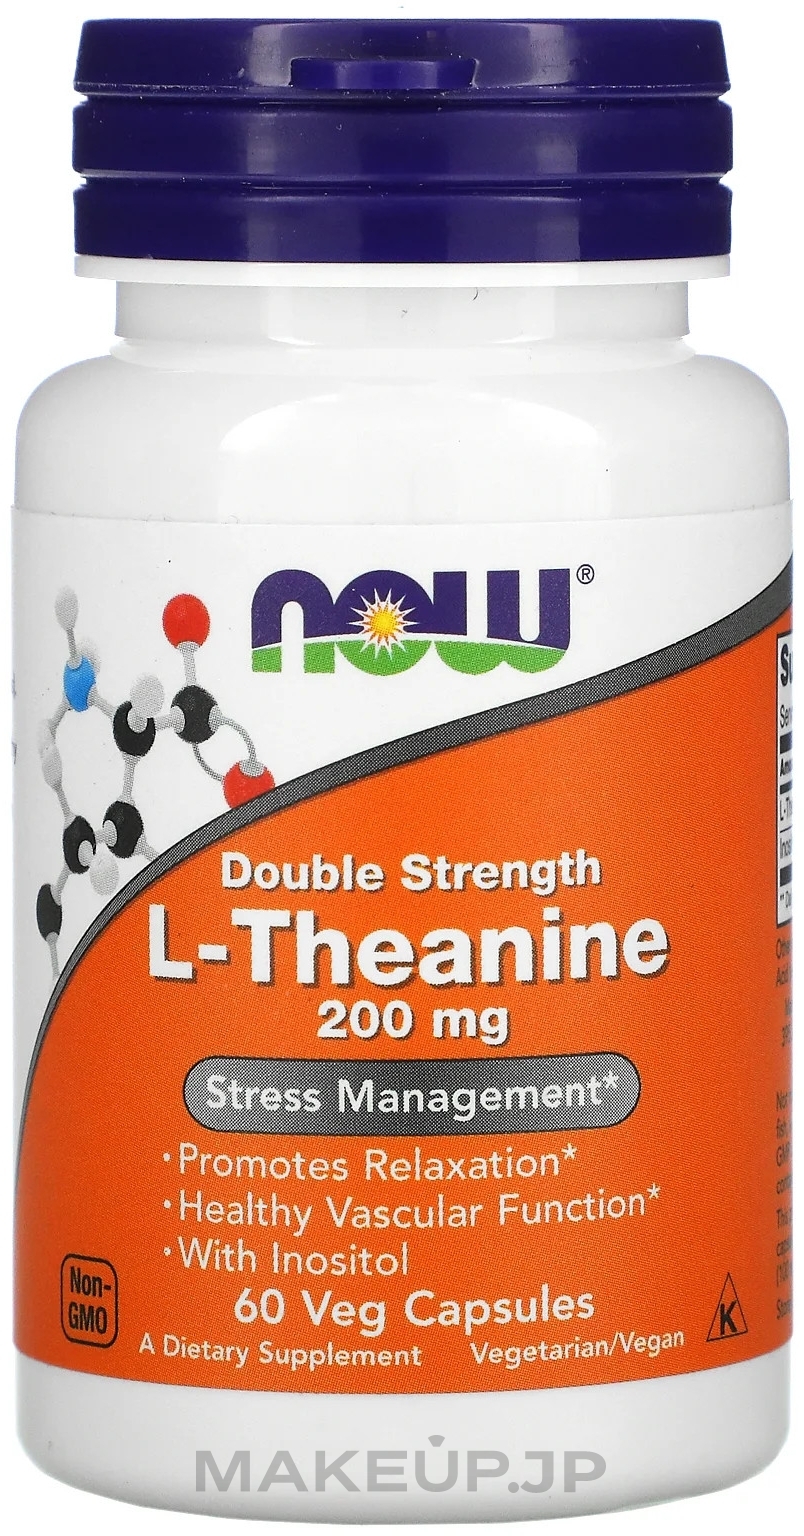 Dietary Supplement "L-Theanine", 200mg - Now Foods L-Theanine Double Strength Veg Capsules — photo 60 szt.